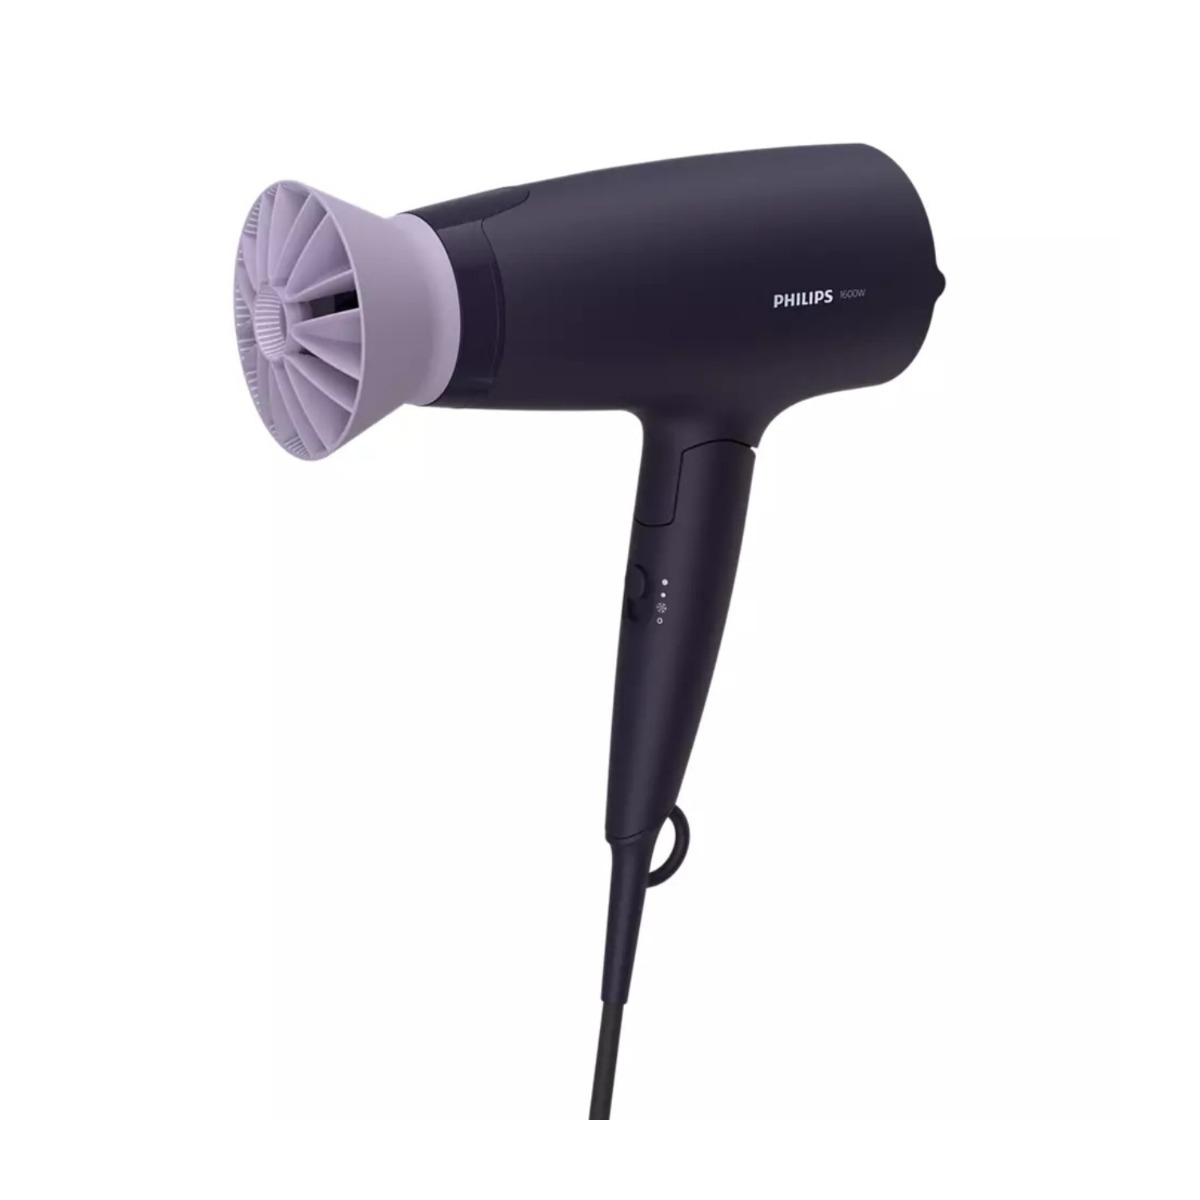 Philips 3000 Series Hair Dryer-Thermoprotect Airflower Advanced, BHD318/00